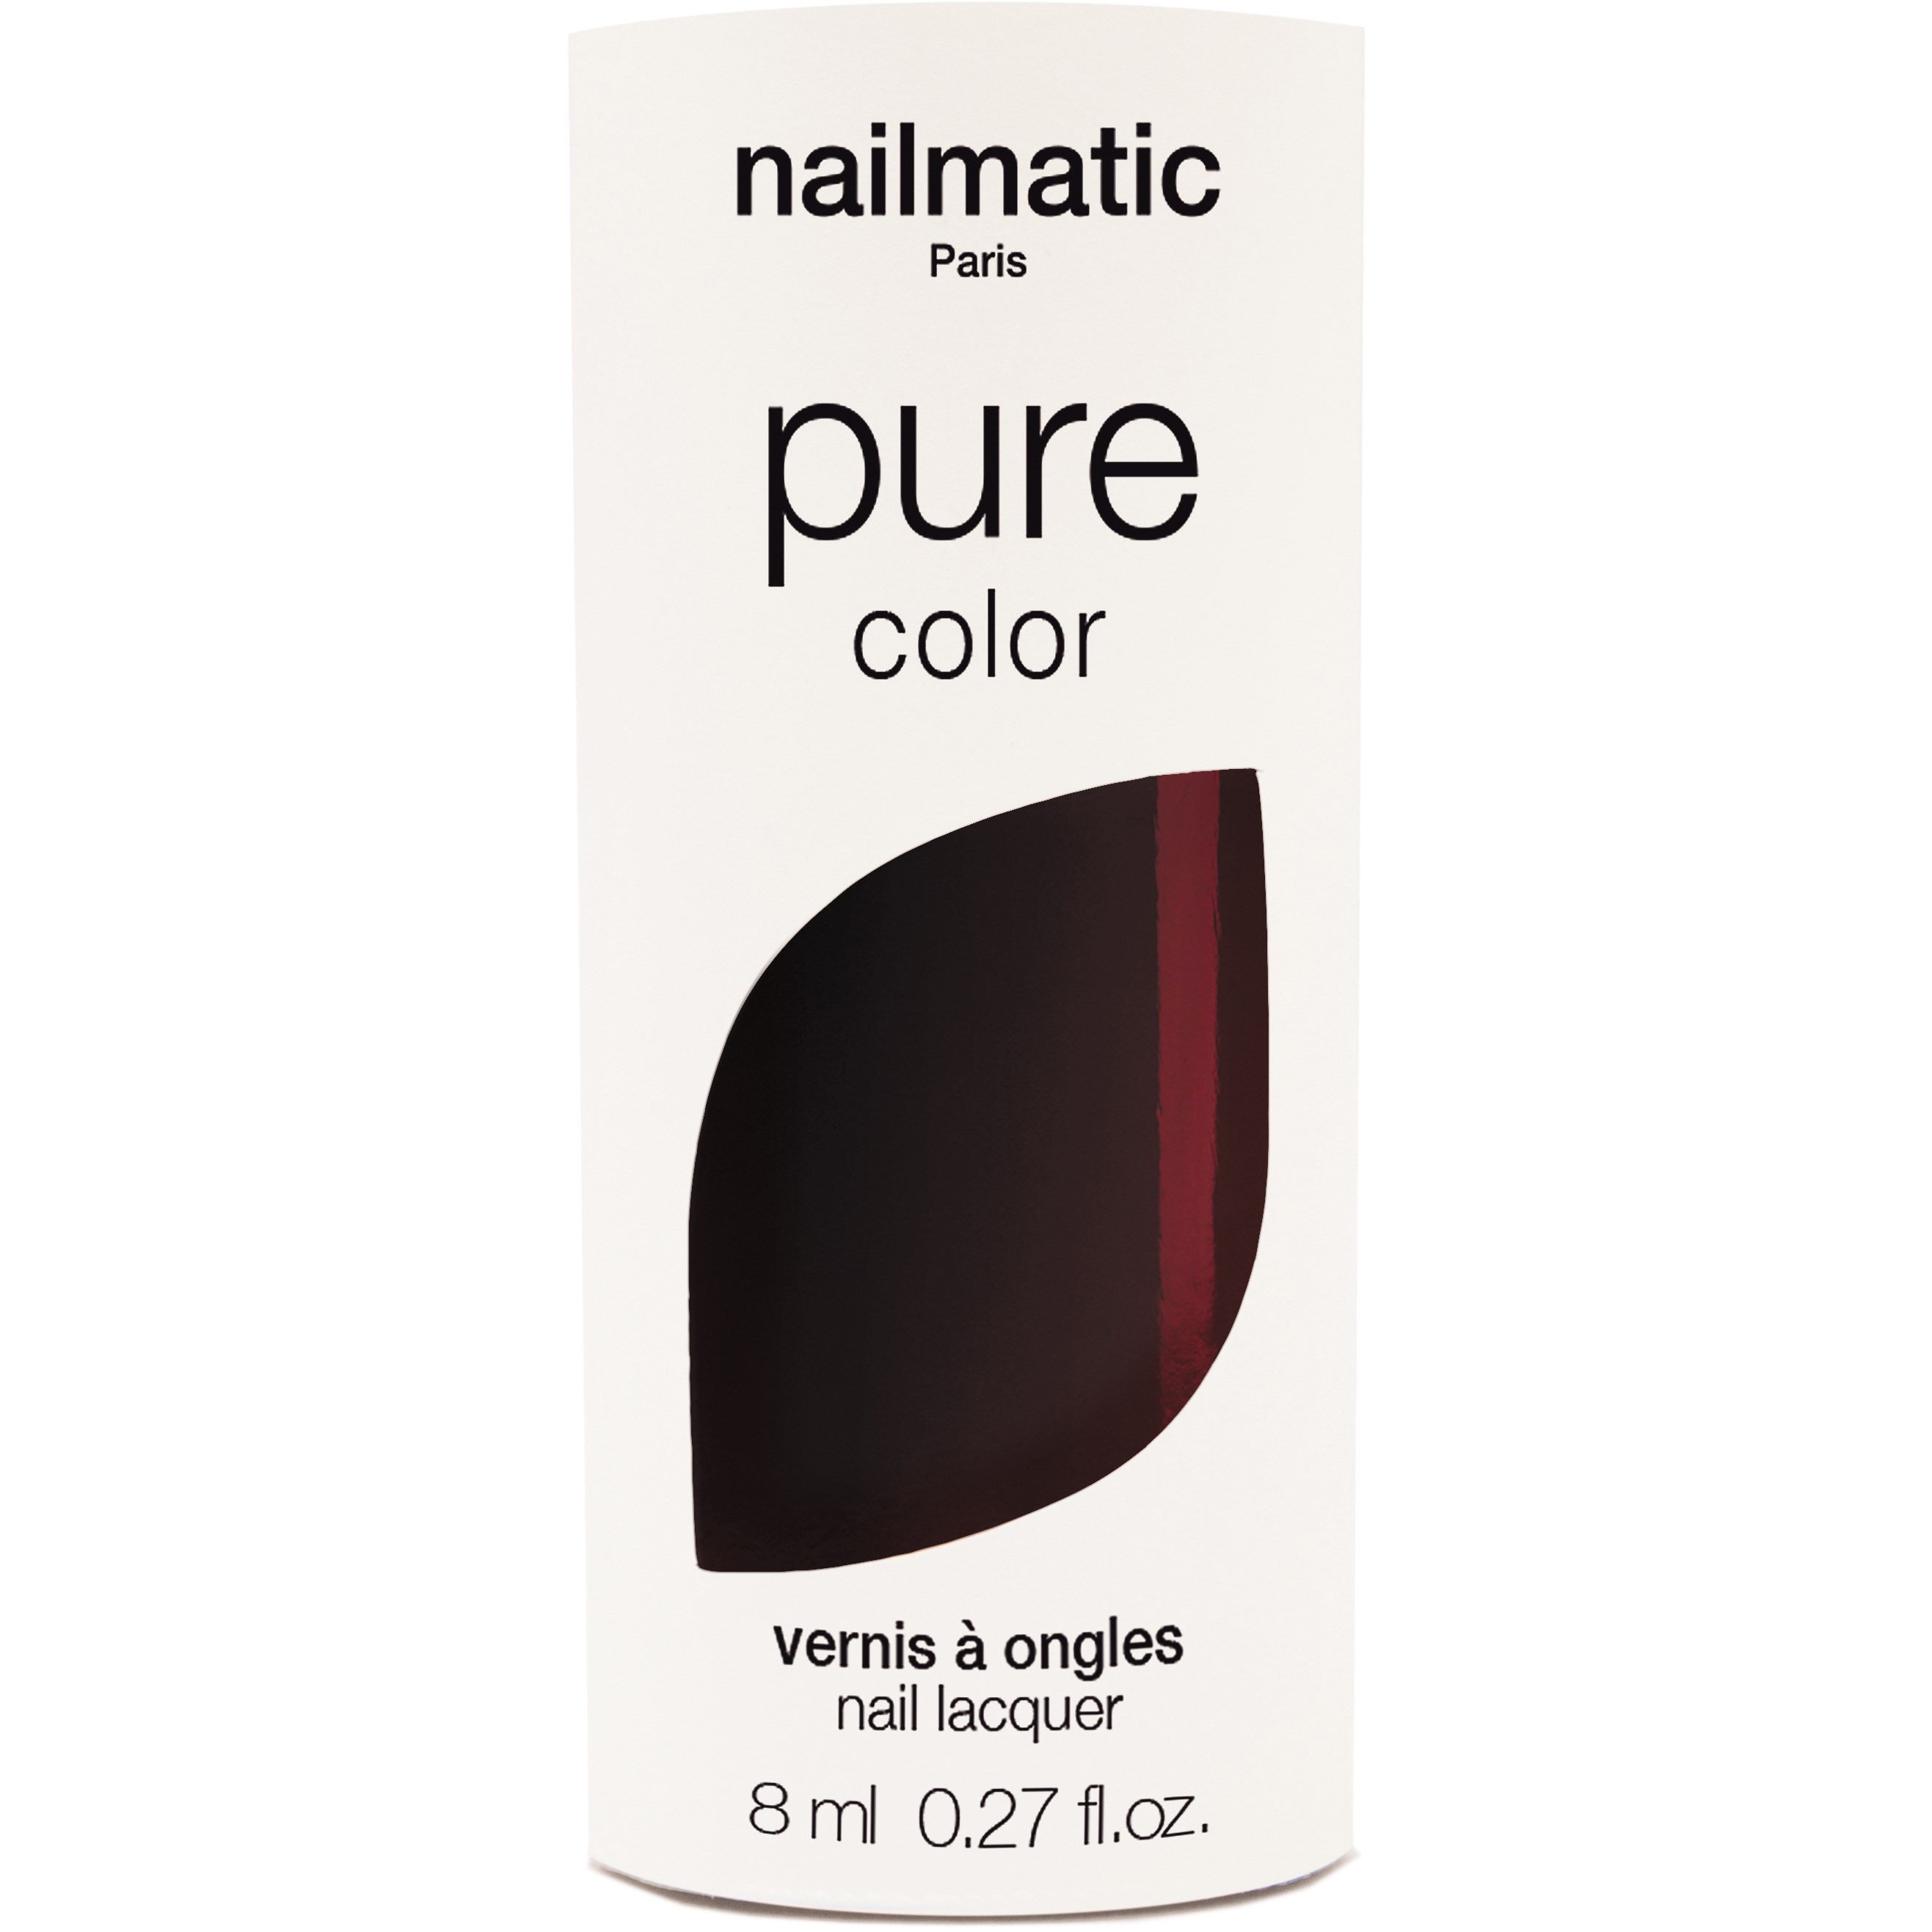 Nailmatic Pure Colour YALE - Pearly Chocolate YALE - Pearly Choco